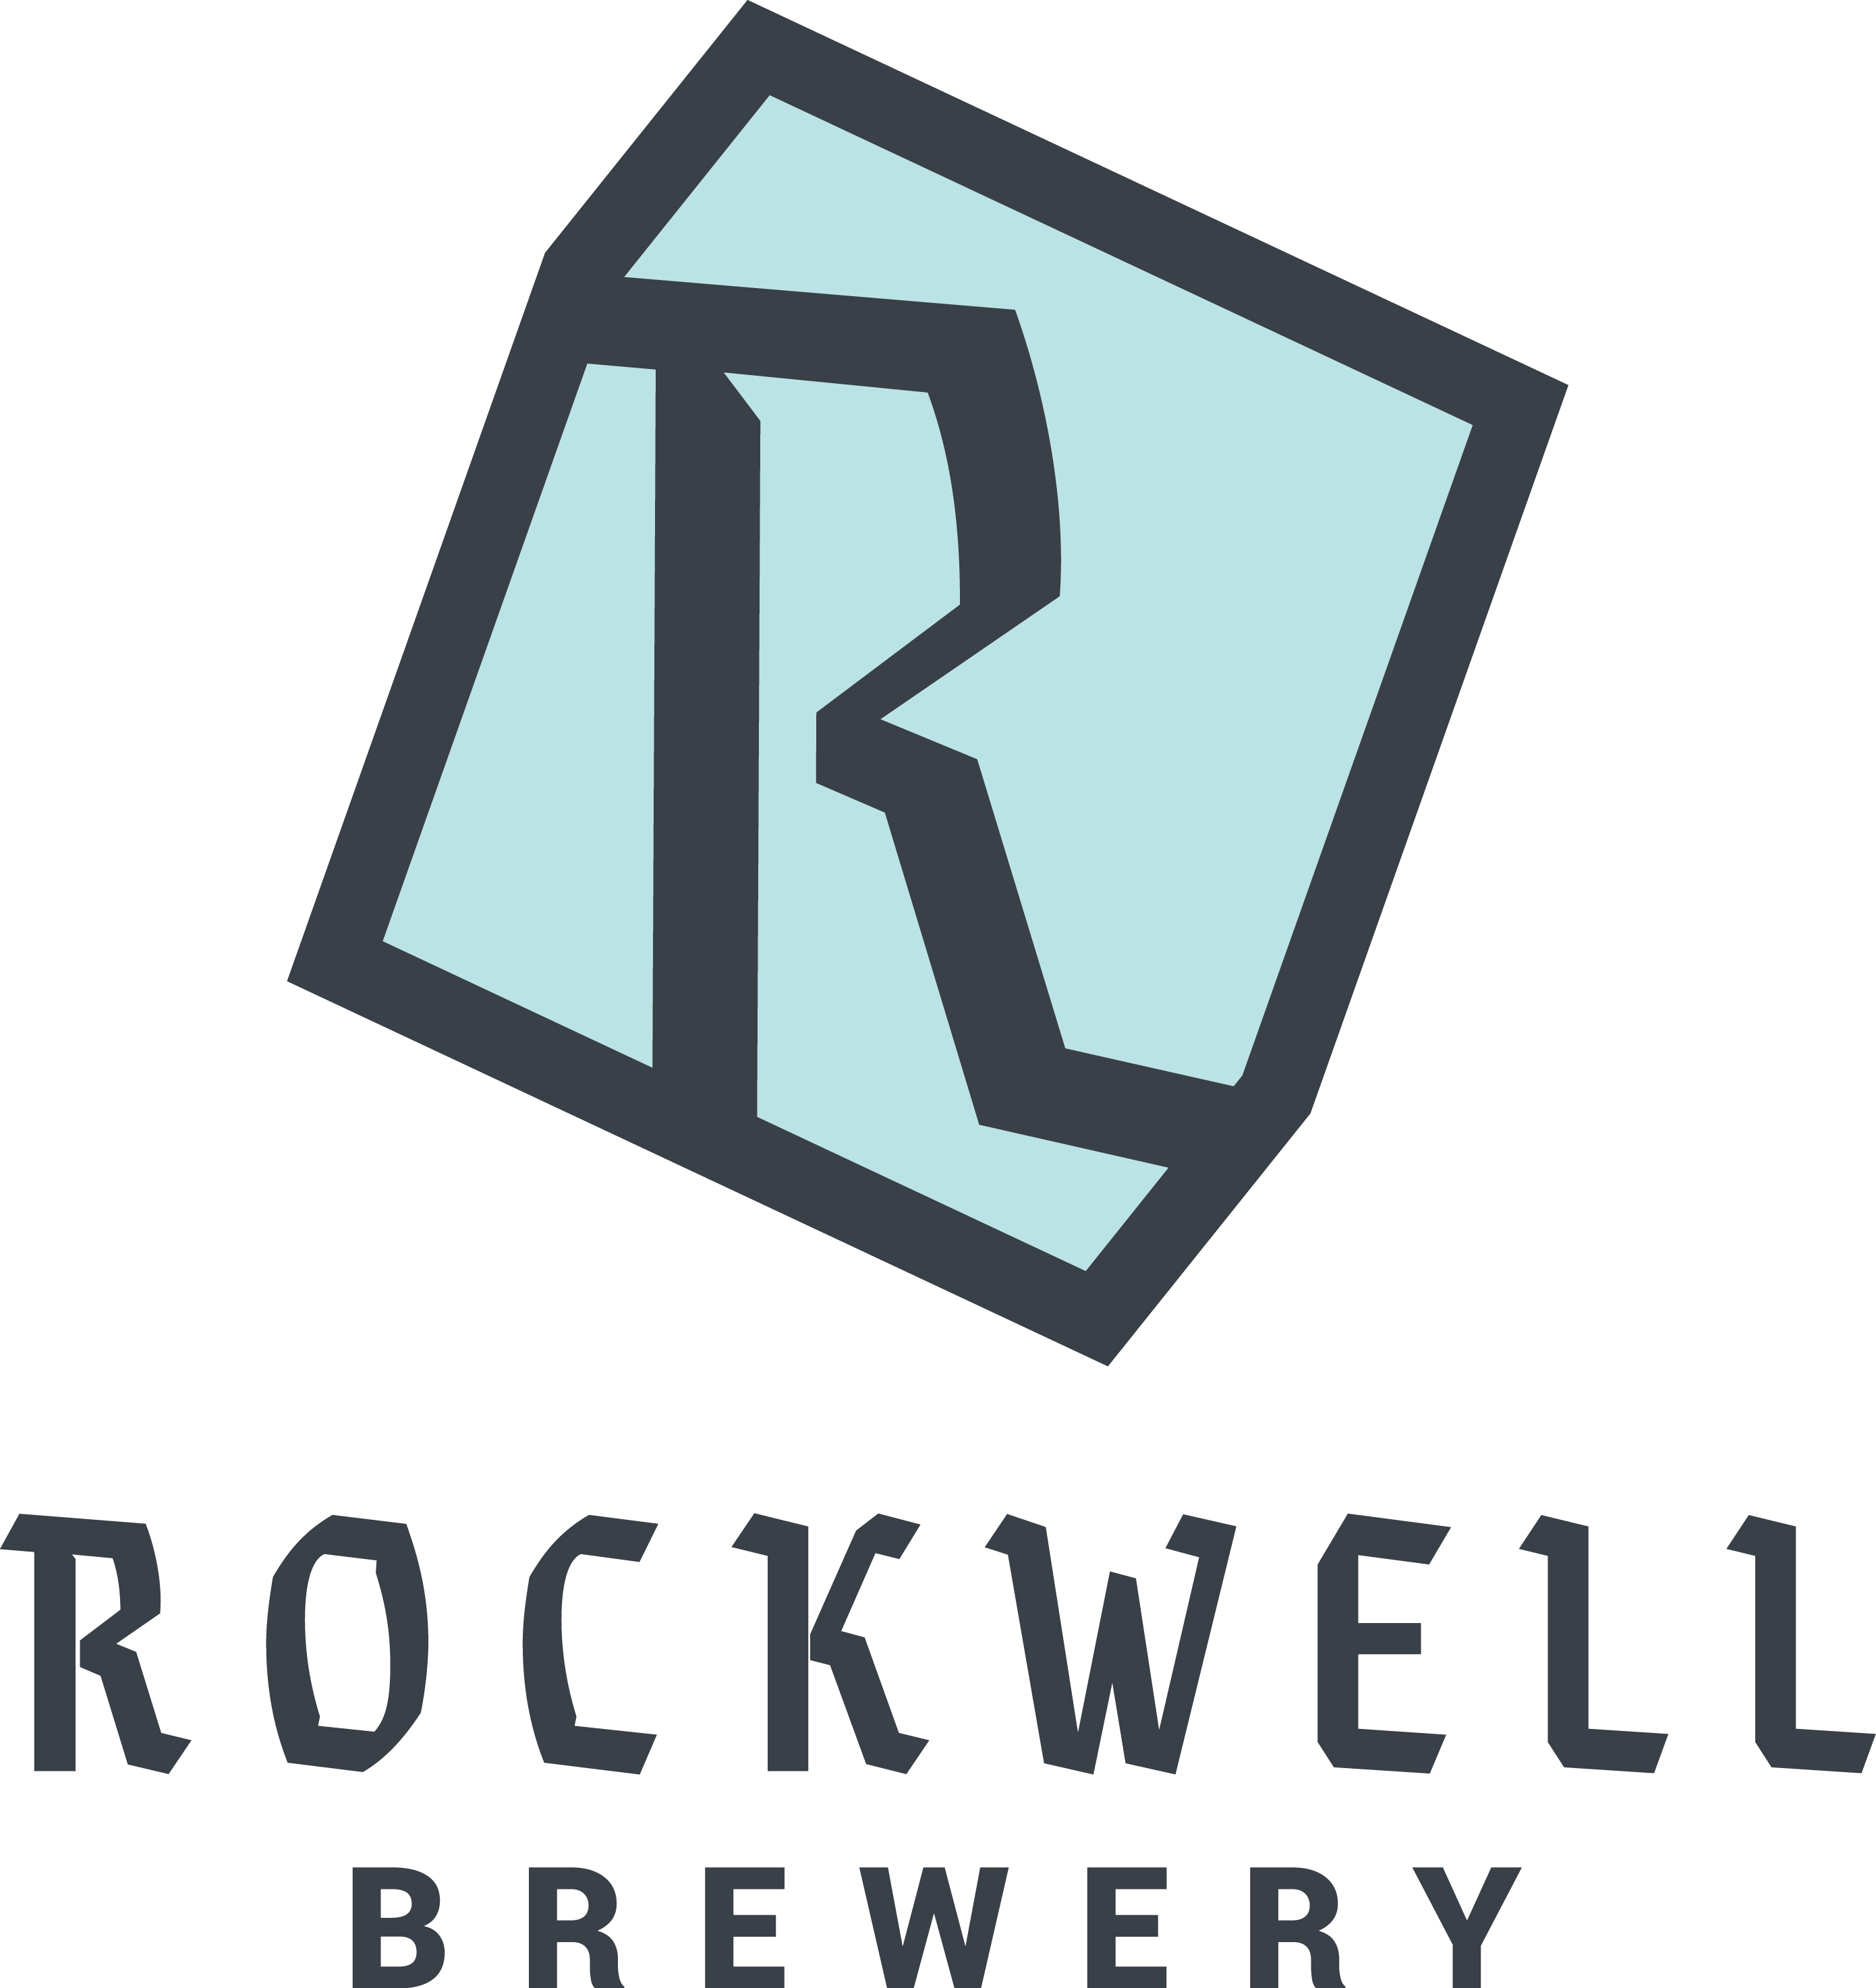 Rockwell Brewery